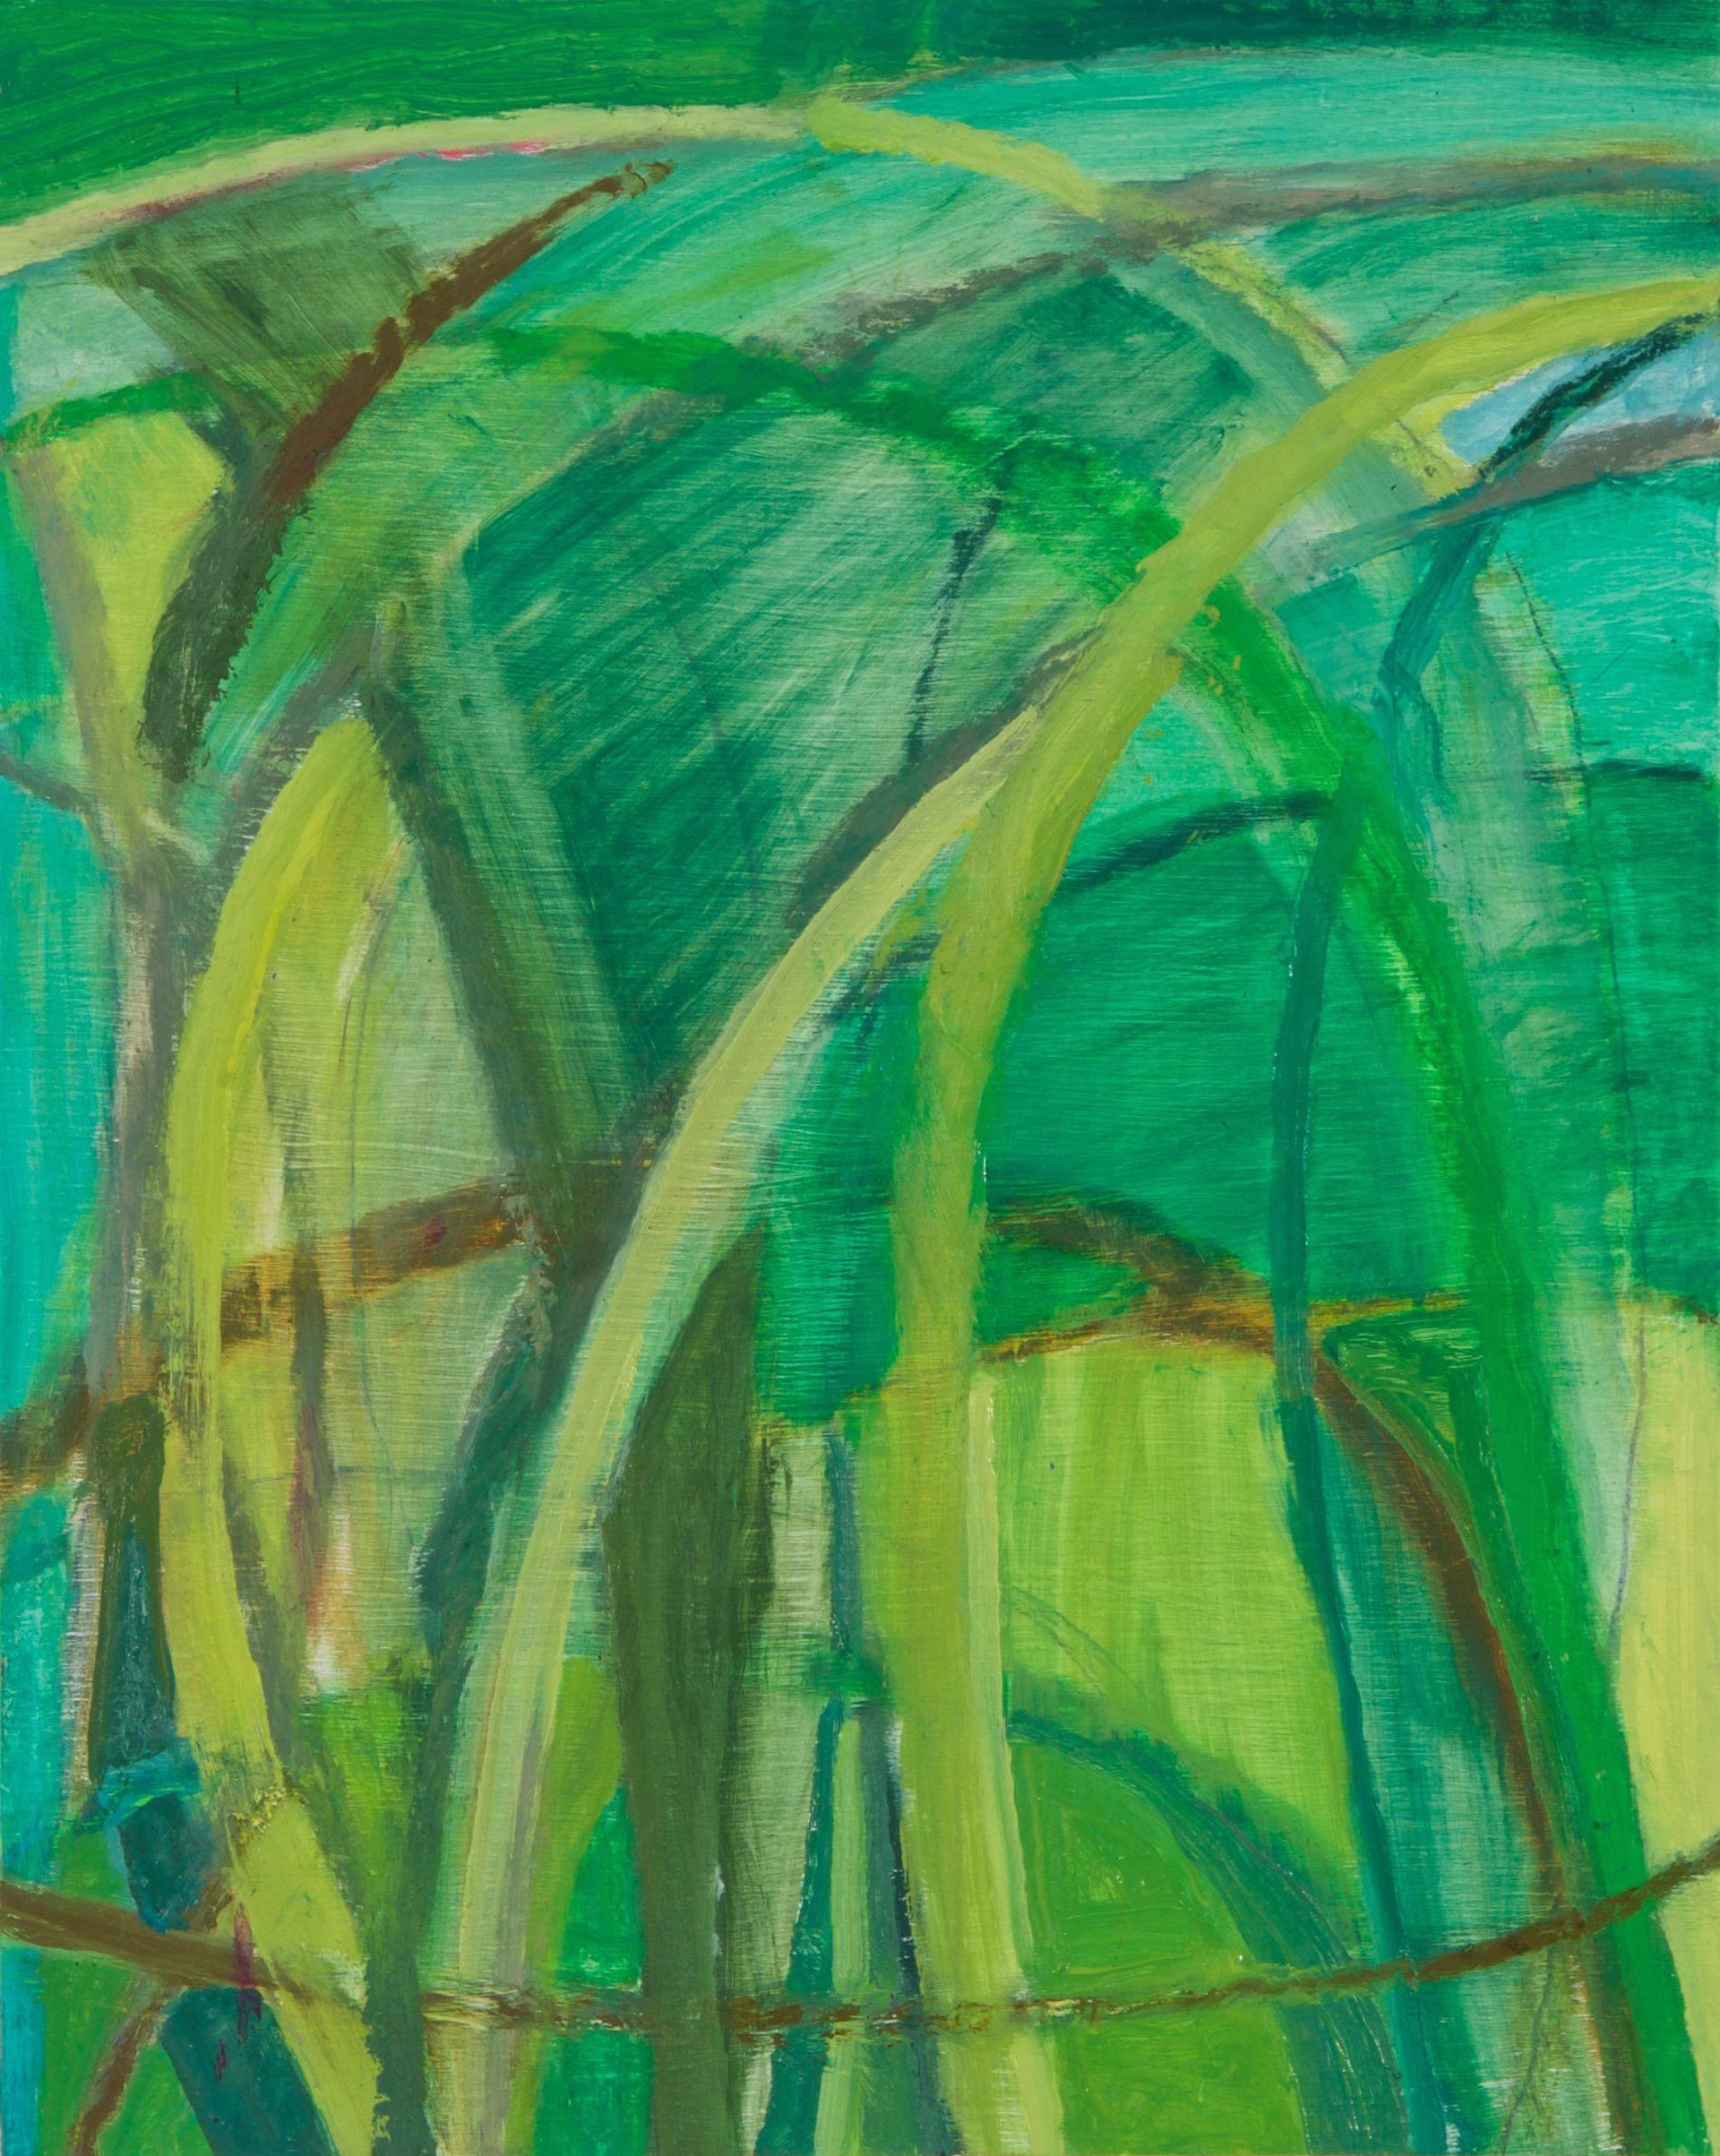 Homage to Color (Green) by Susan Moss